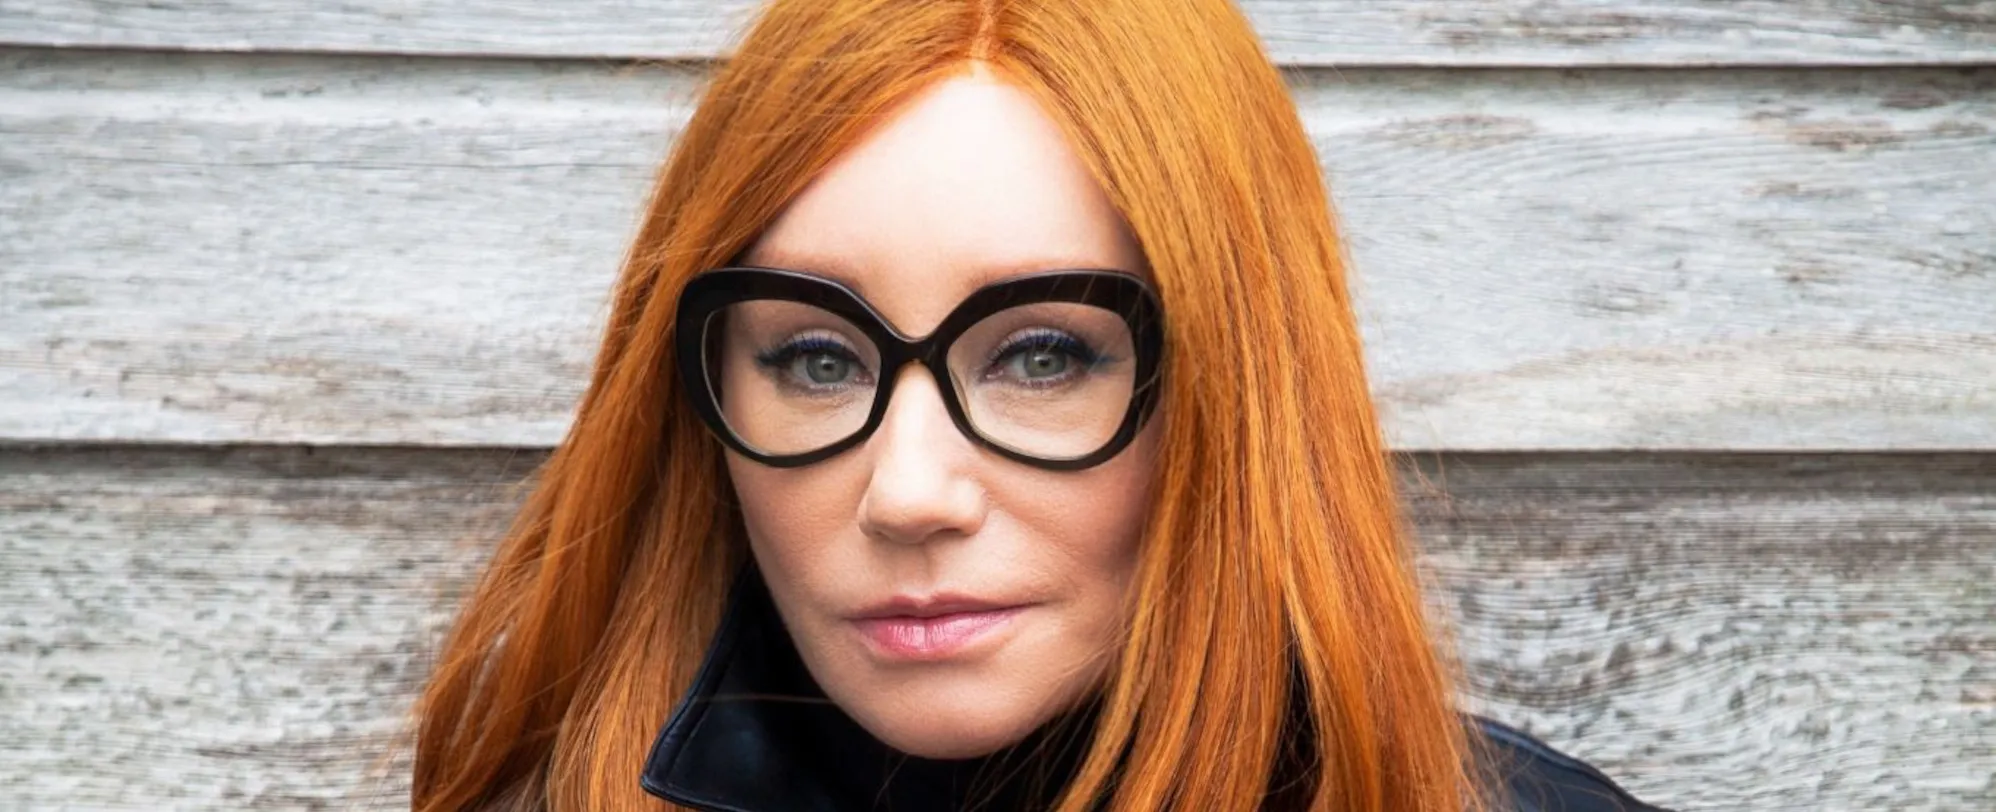 Tori Amos Learns Her Way Through, Set to Release New LP, ‘Ocean To Ocean’